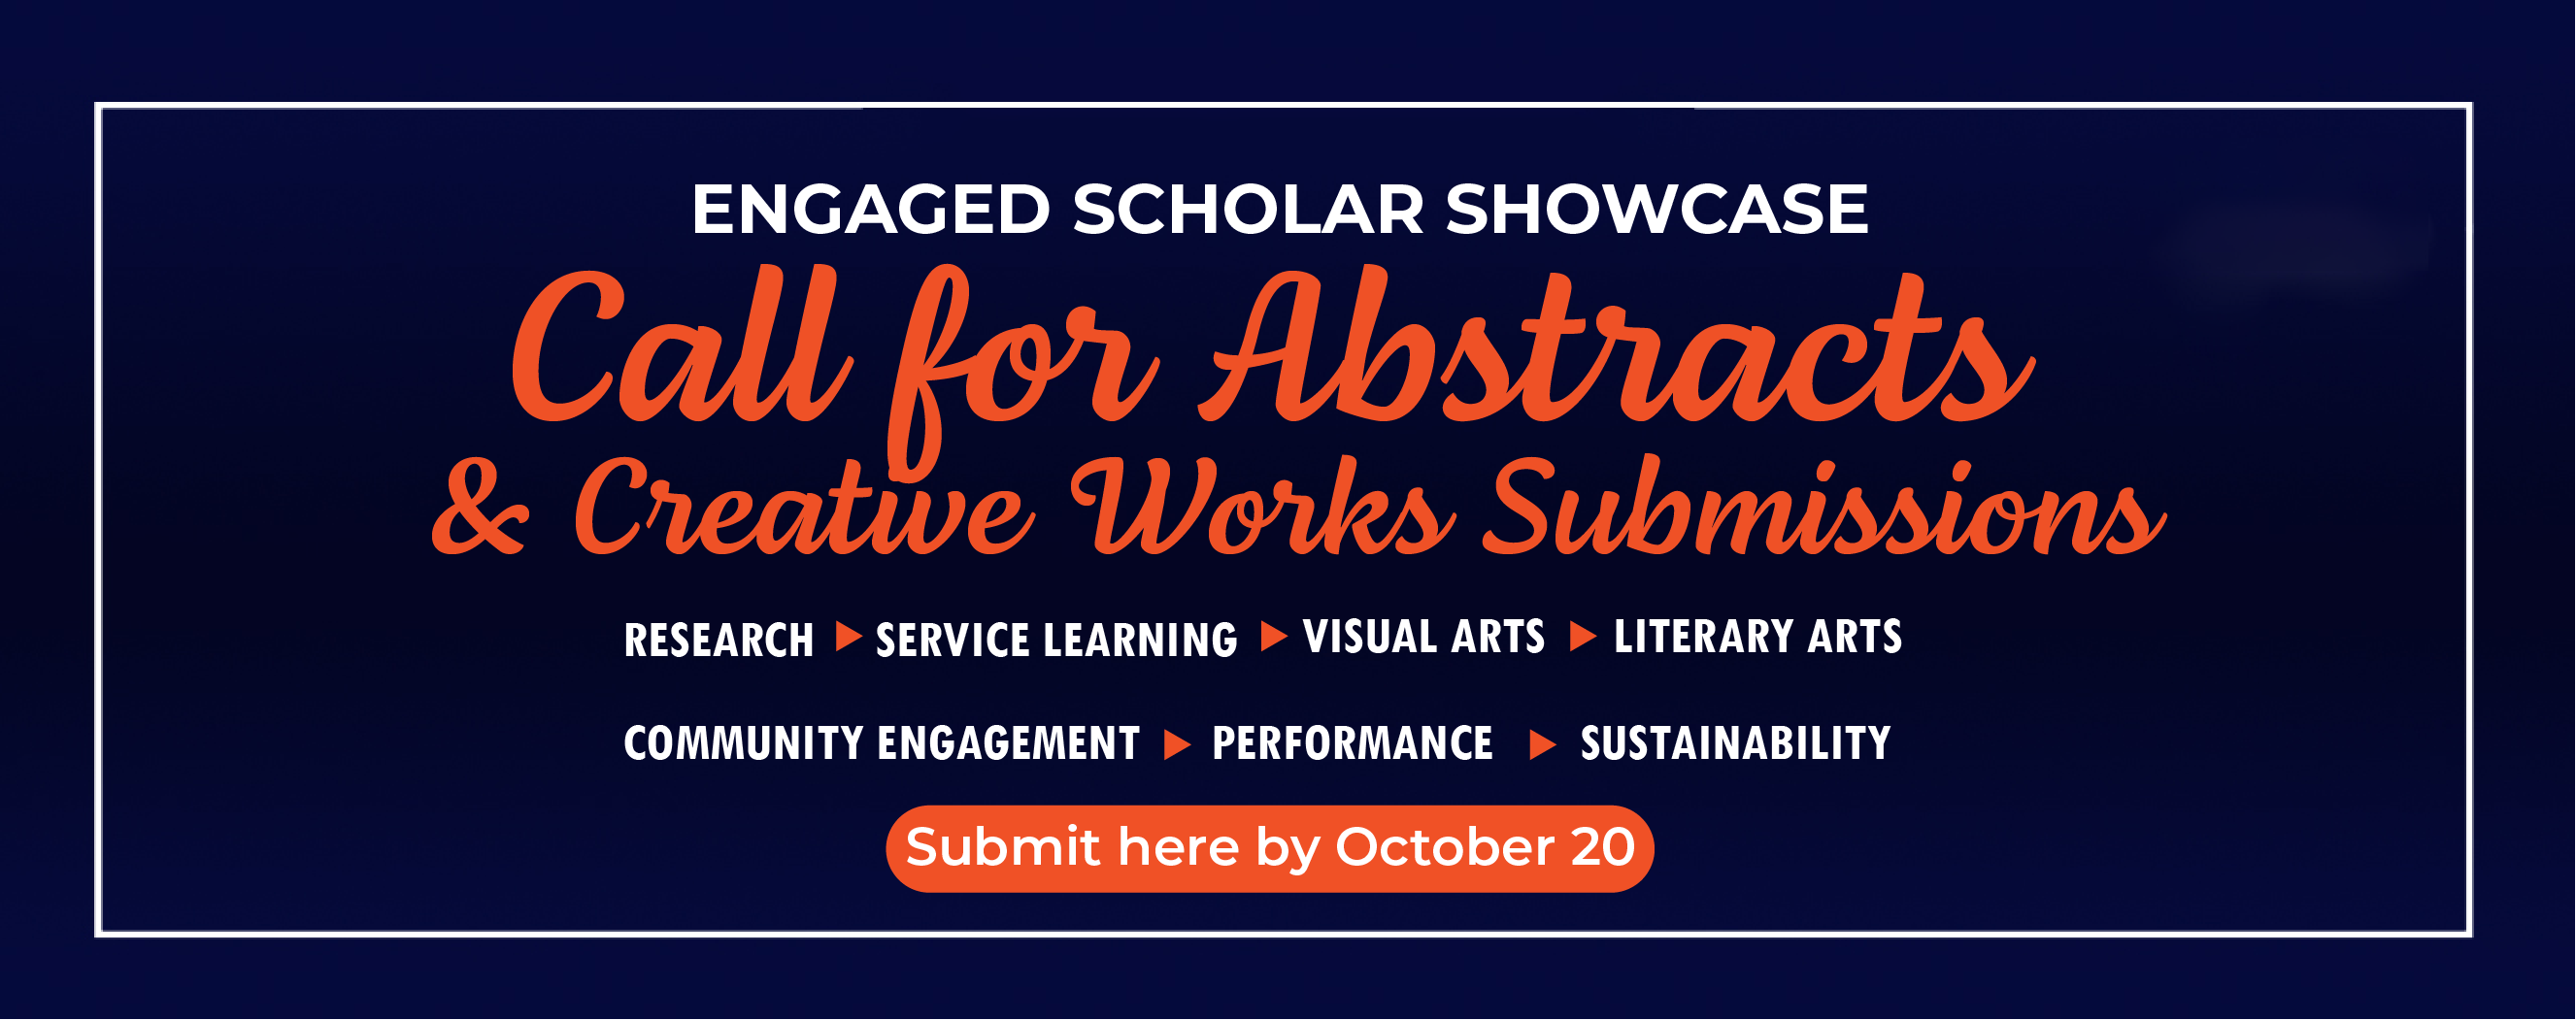 Engaged Showcase Call for Abstracts